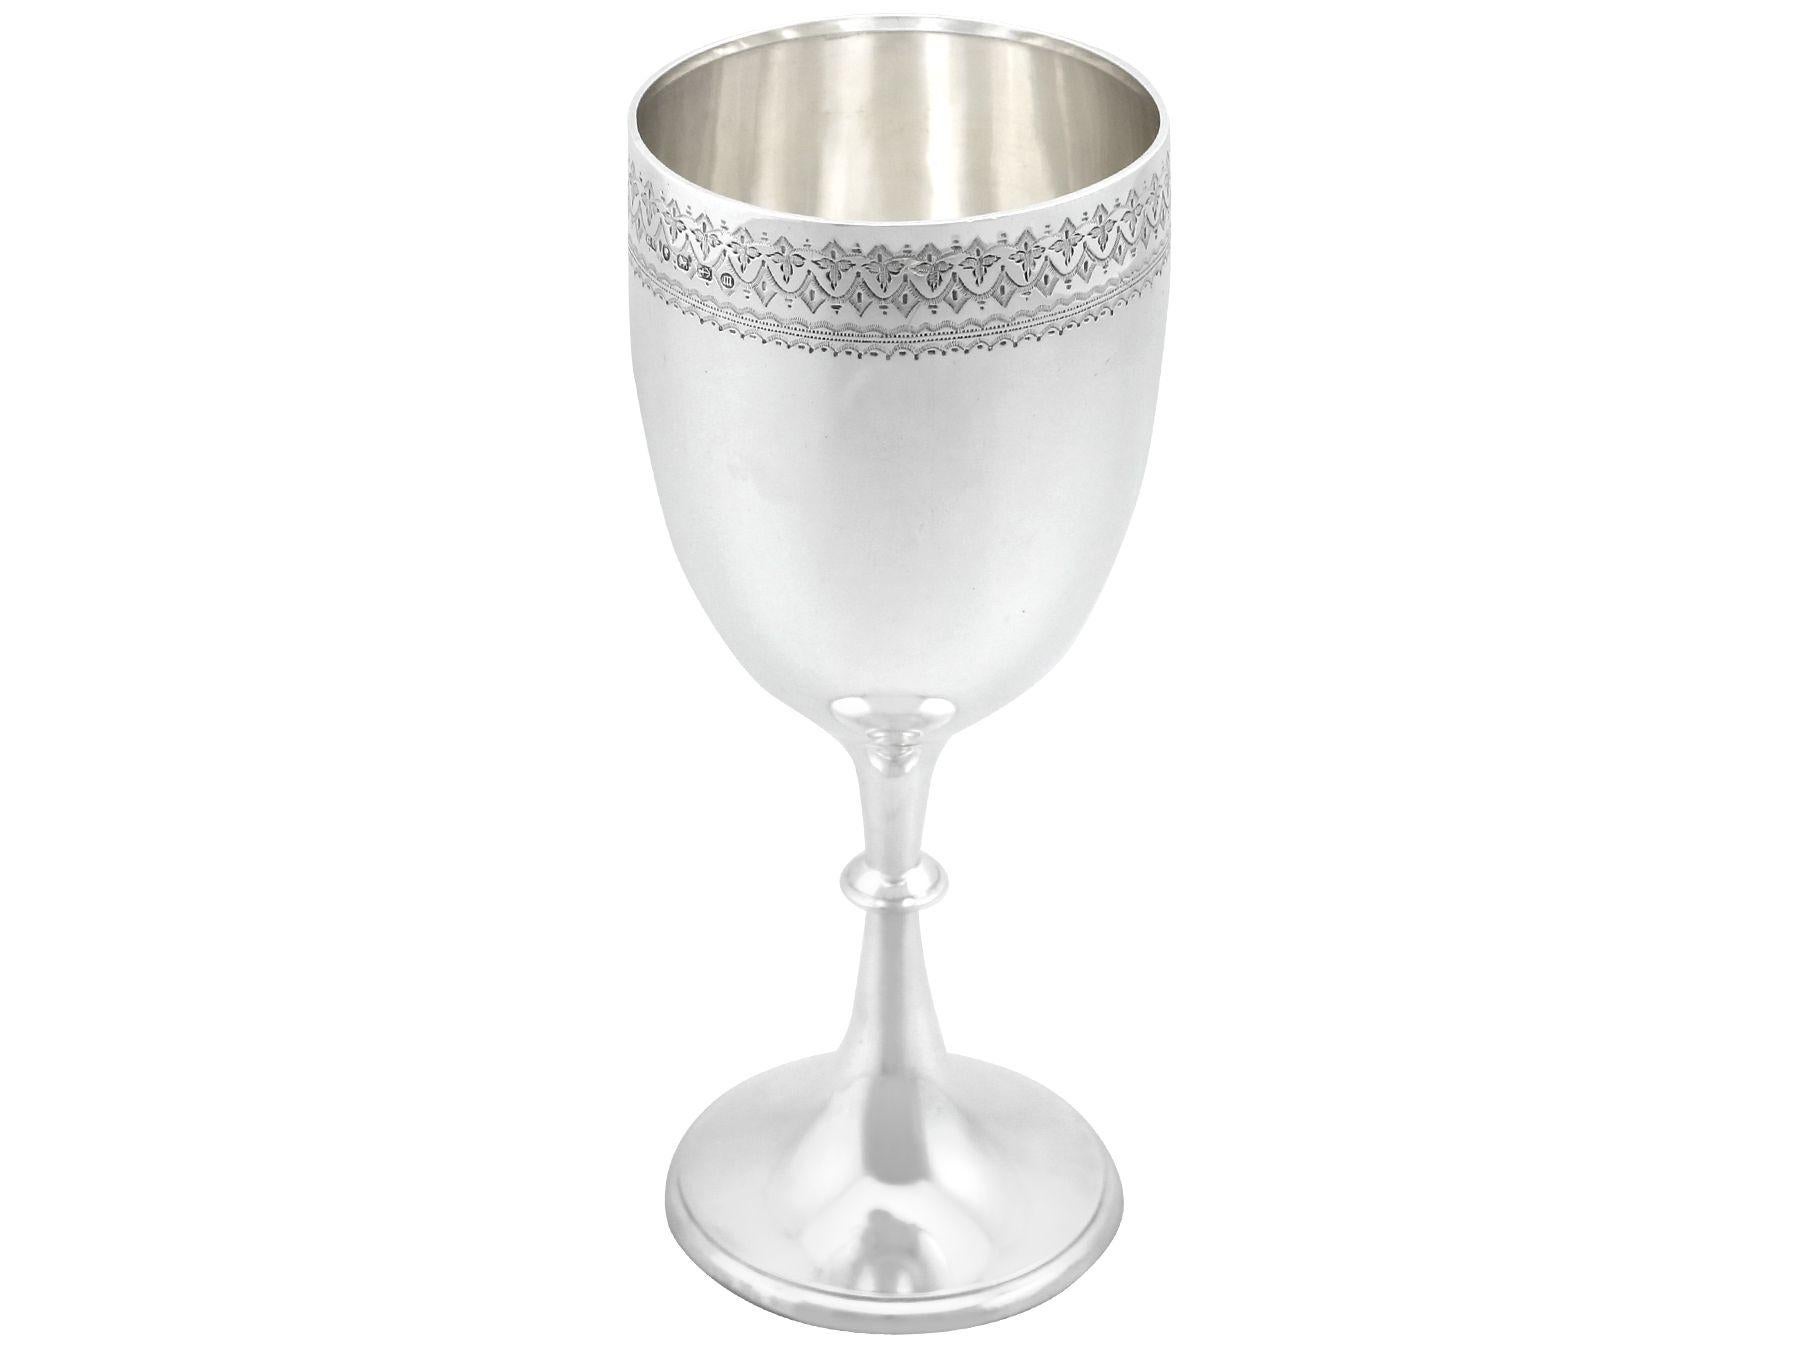 An exceptional, fine and impressive antique Victorian English sterling silver goblet; an addition to our collection of presentation related silverware.

This exceptional antique Victorian sterling silver goblet has a circular bell shaped form onto